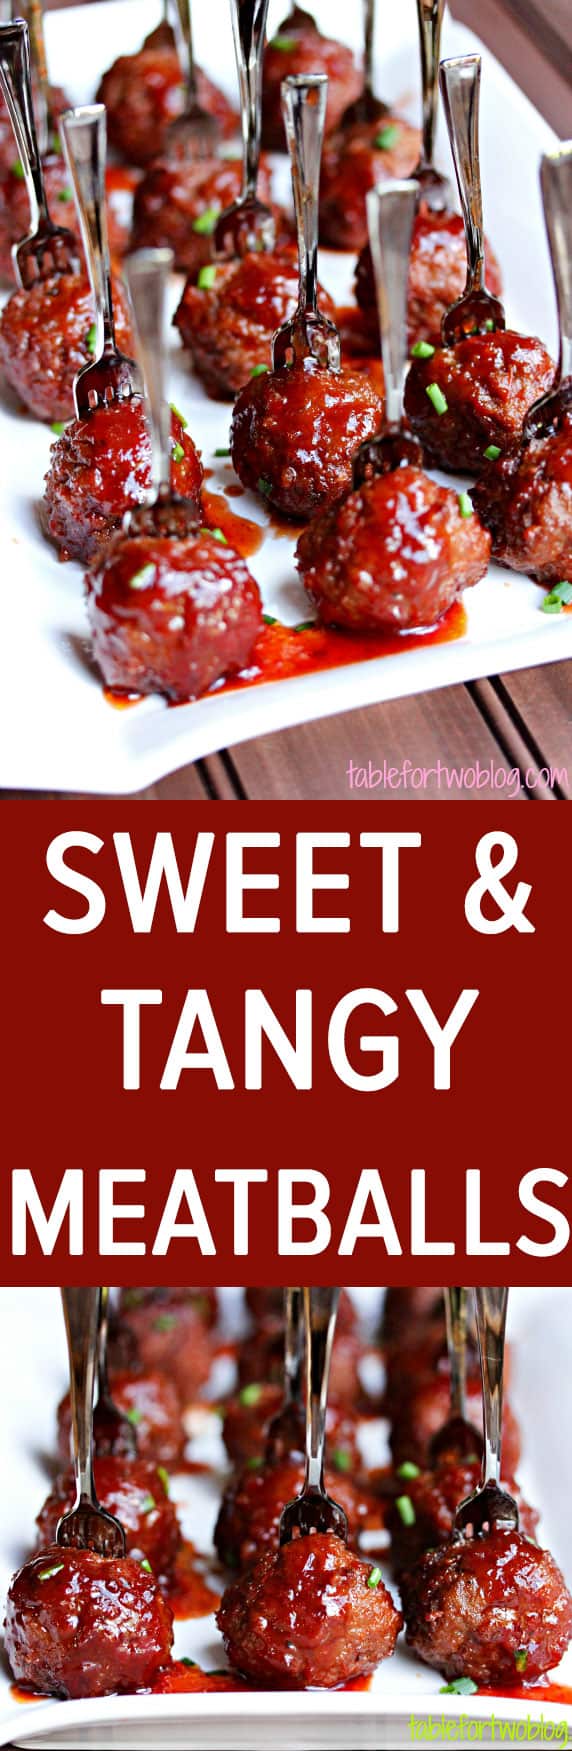 With only 3 ingredients these sweet & tangy balls make a quick and easy party appetizer. Your guests will love them!